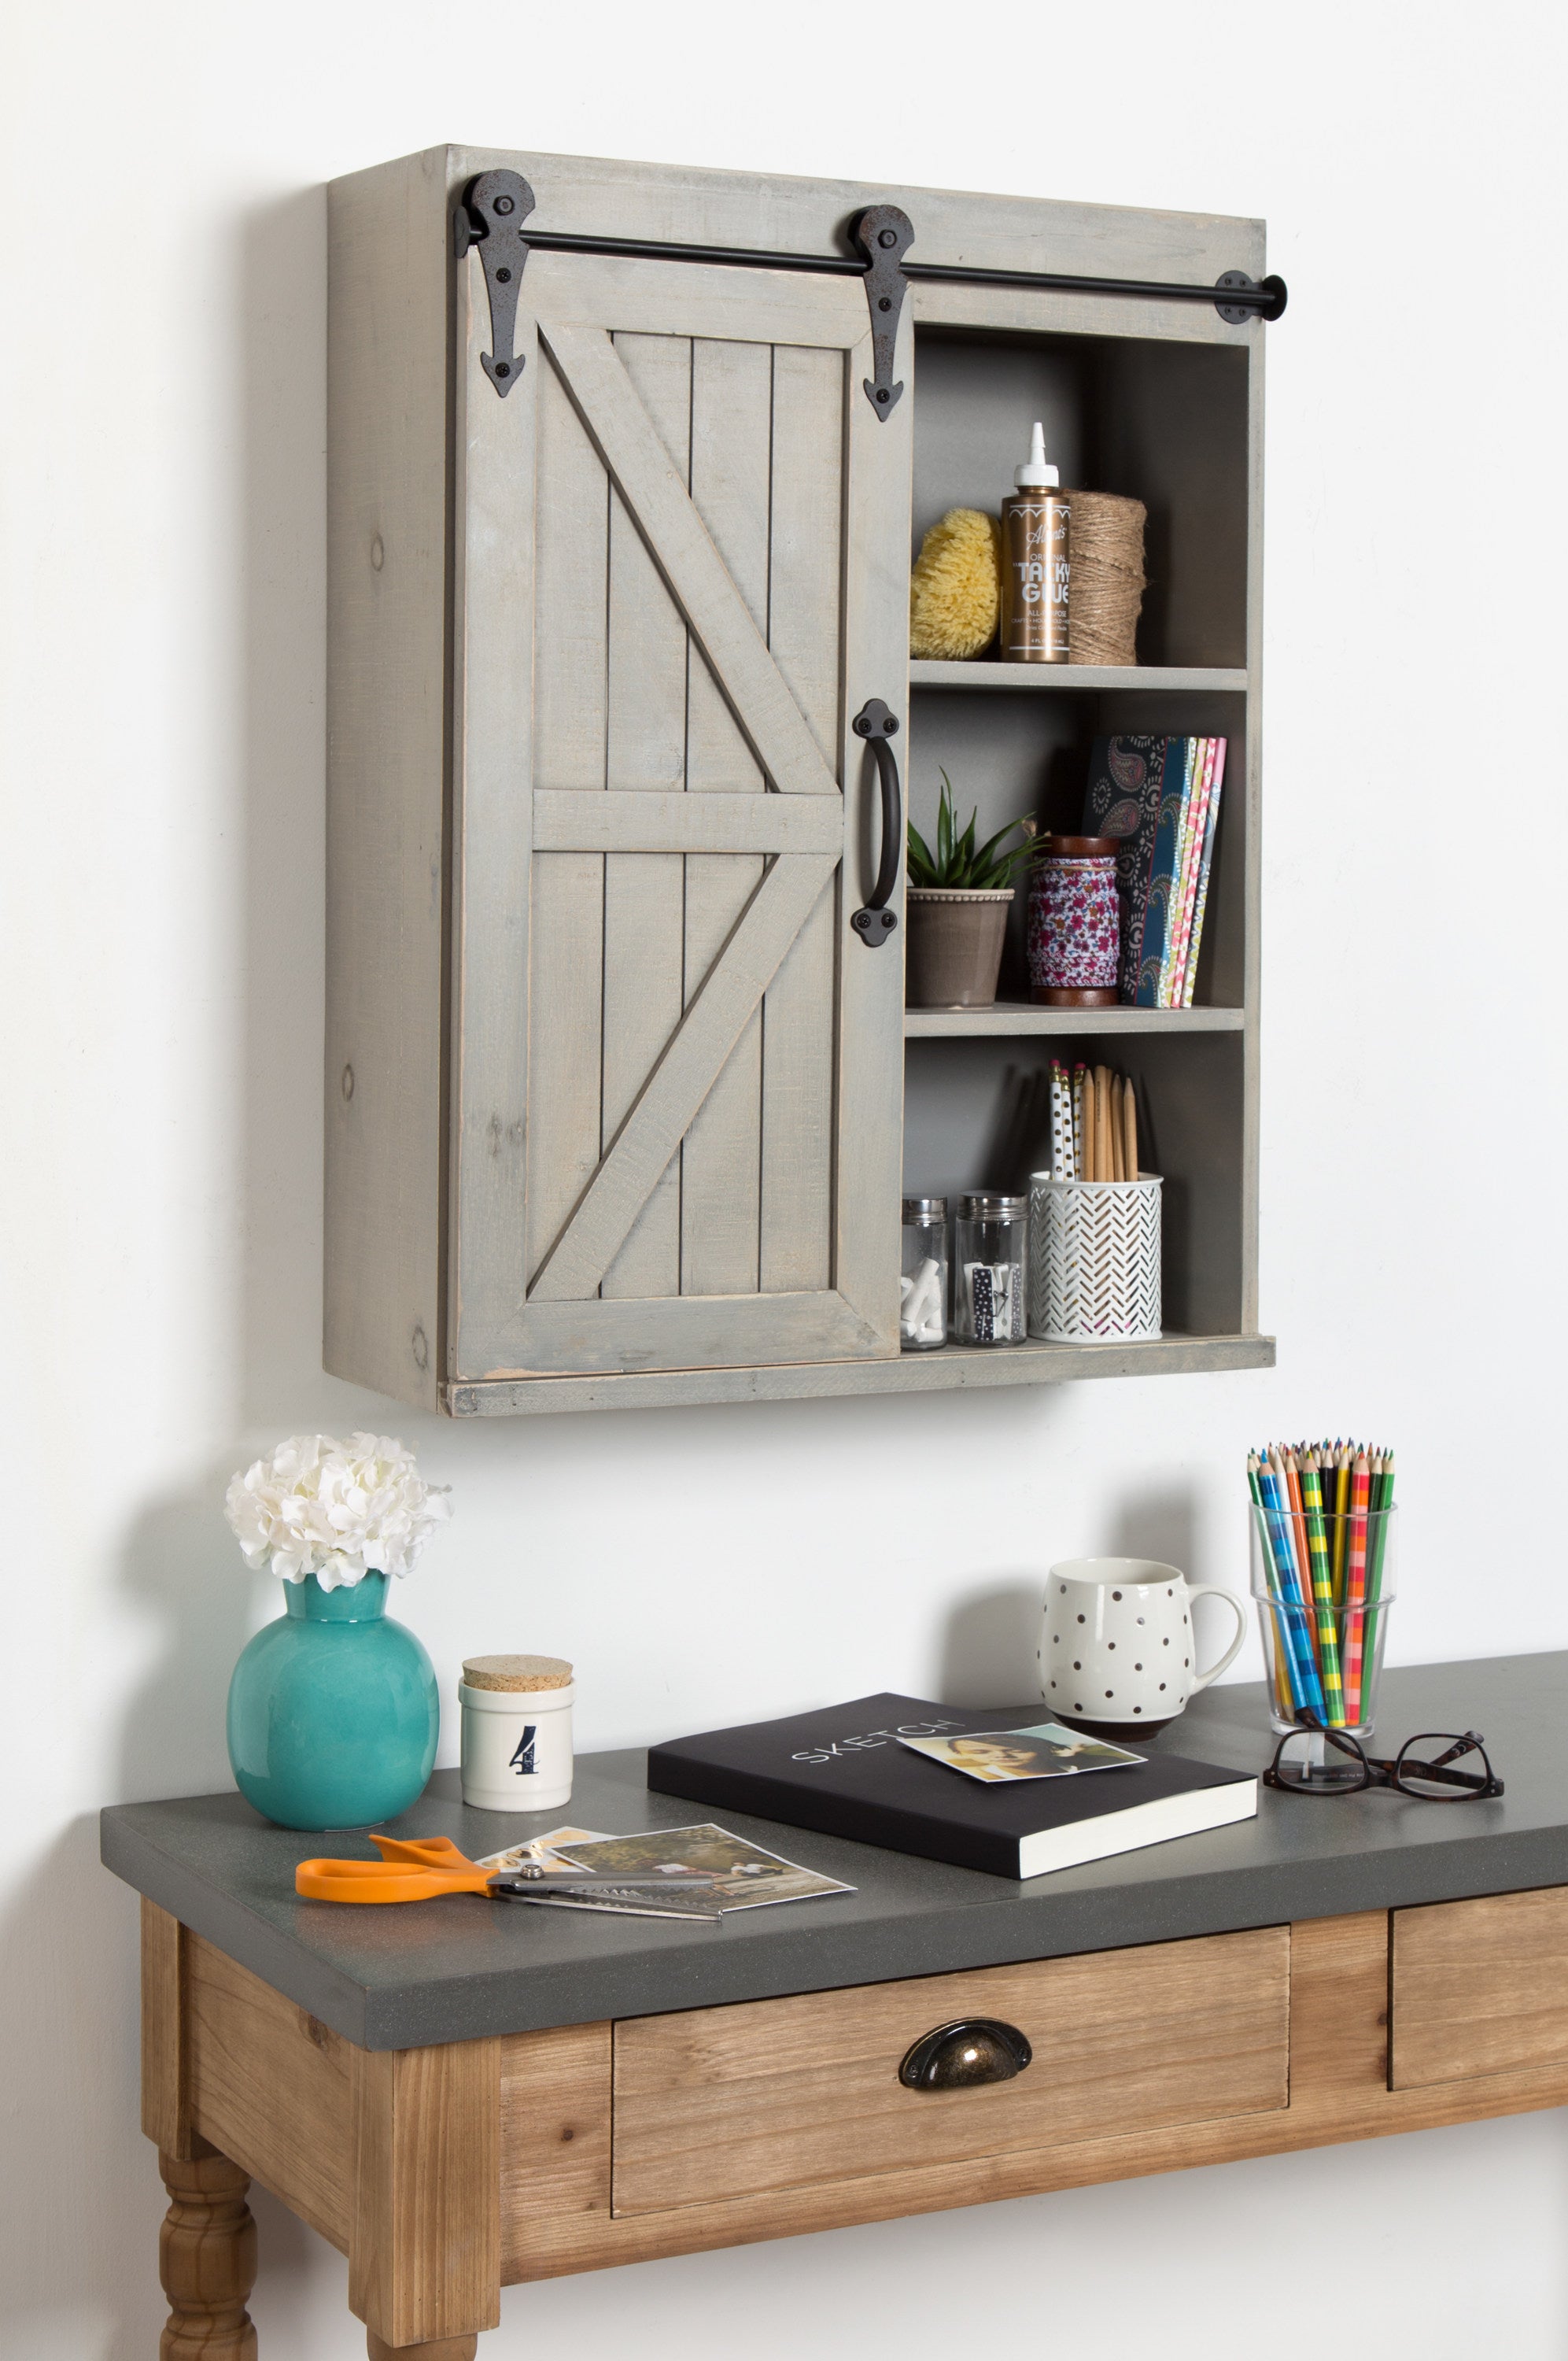 Cates Wood Wall Storage Cabinet with Sliding Barn Door